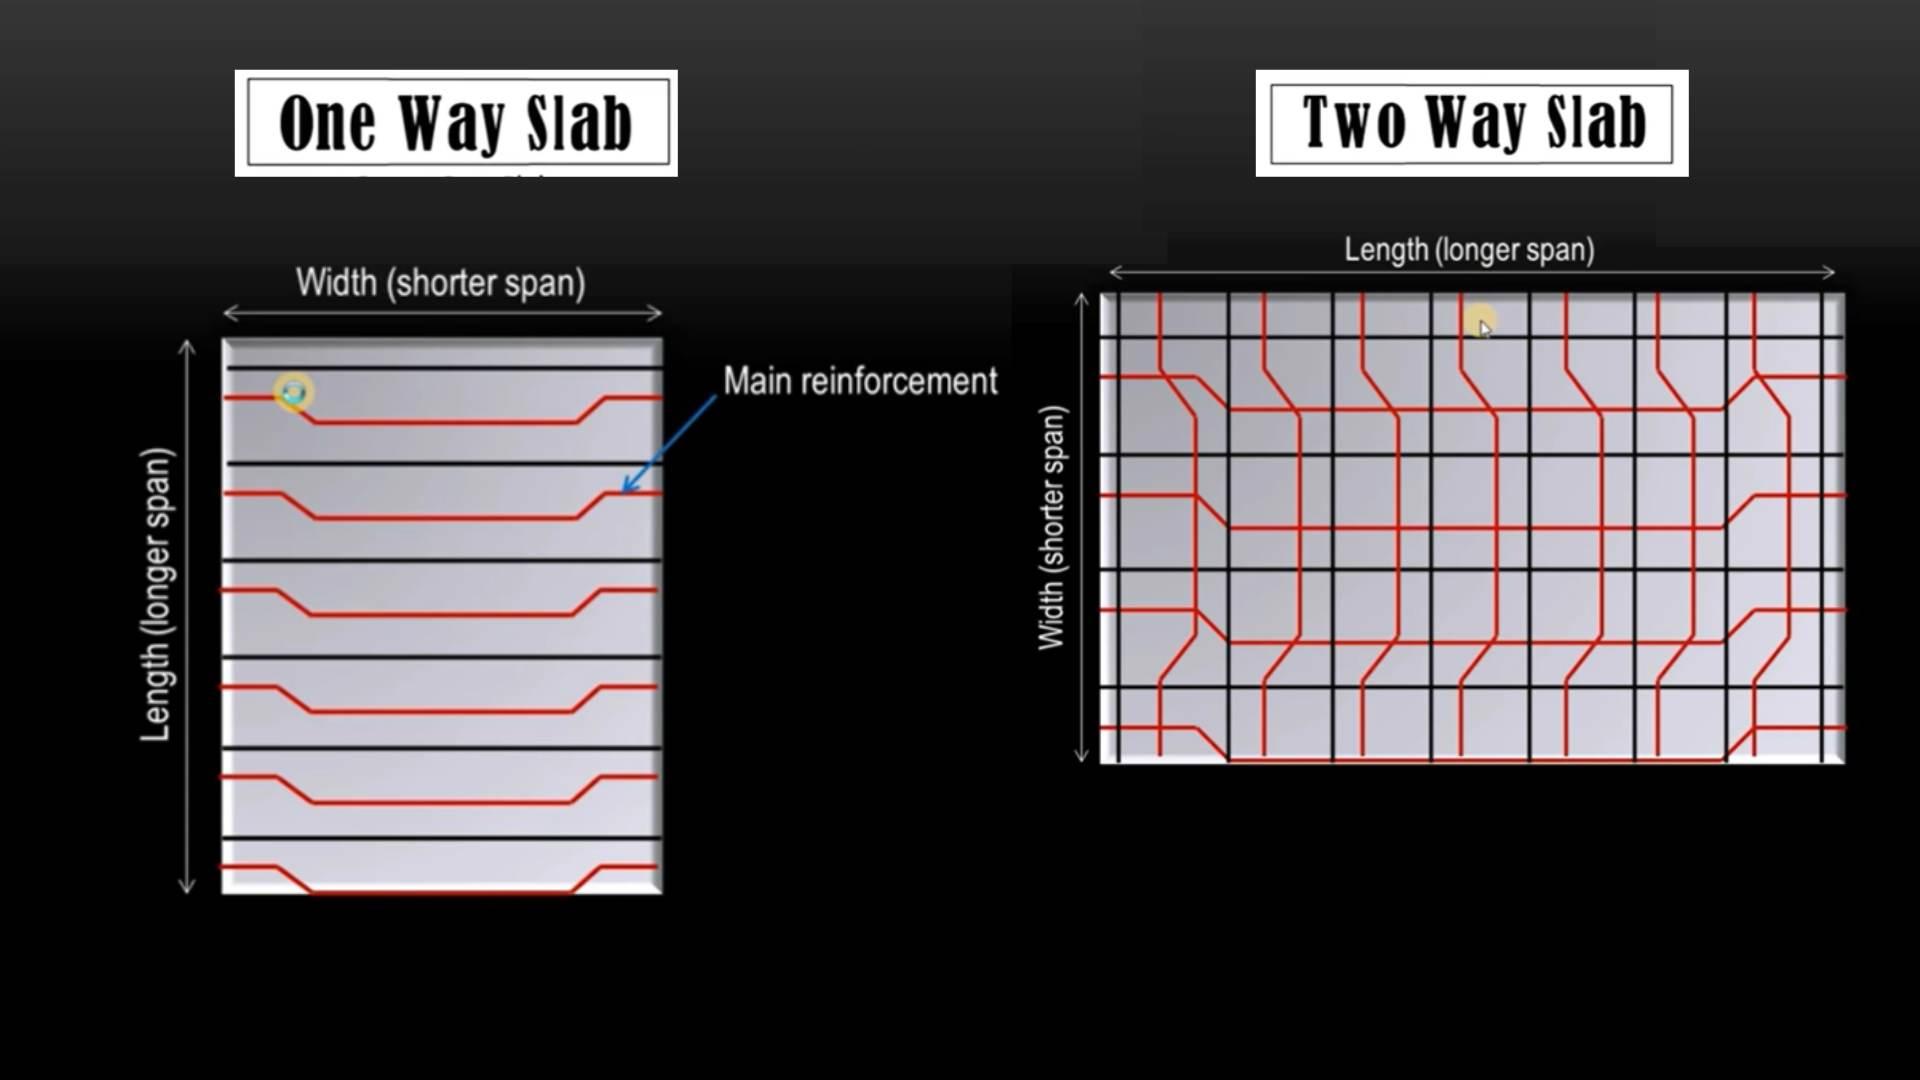 What is the difference between One Way Slab and Two Way Slab?